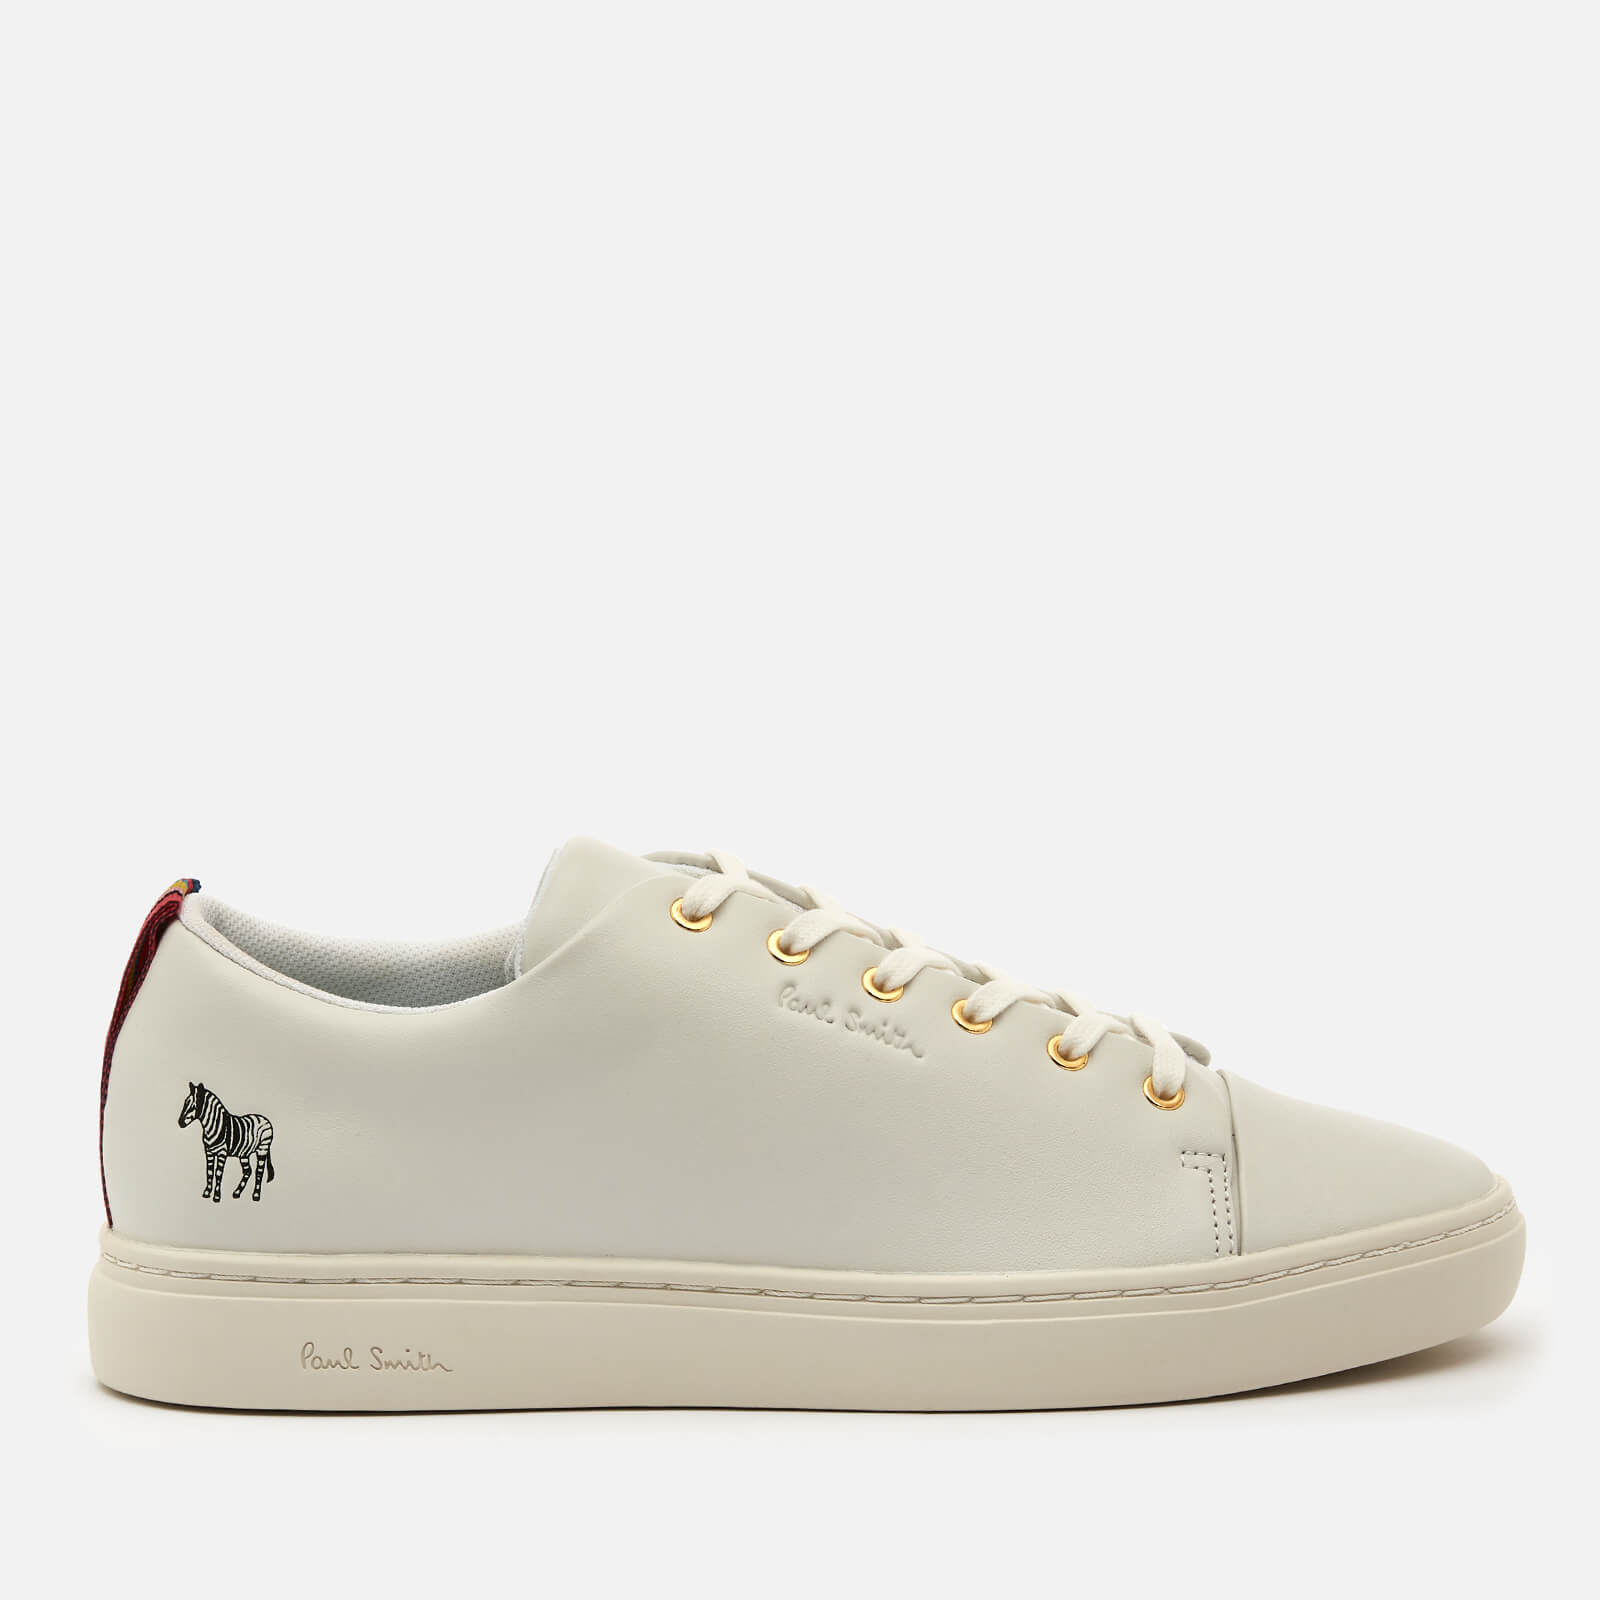 Paul Smith Women's Lee Leather Cupsole Trainers - White - UK 3 von Paul Smith